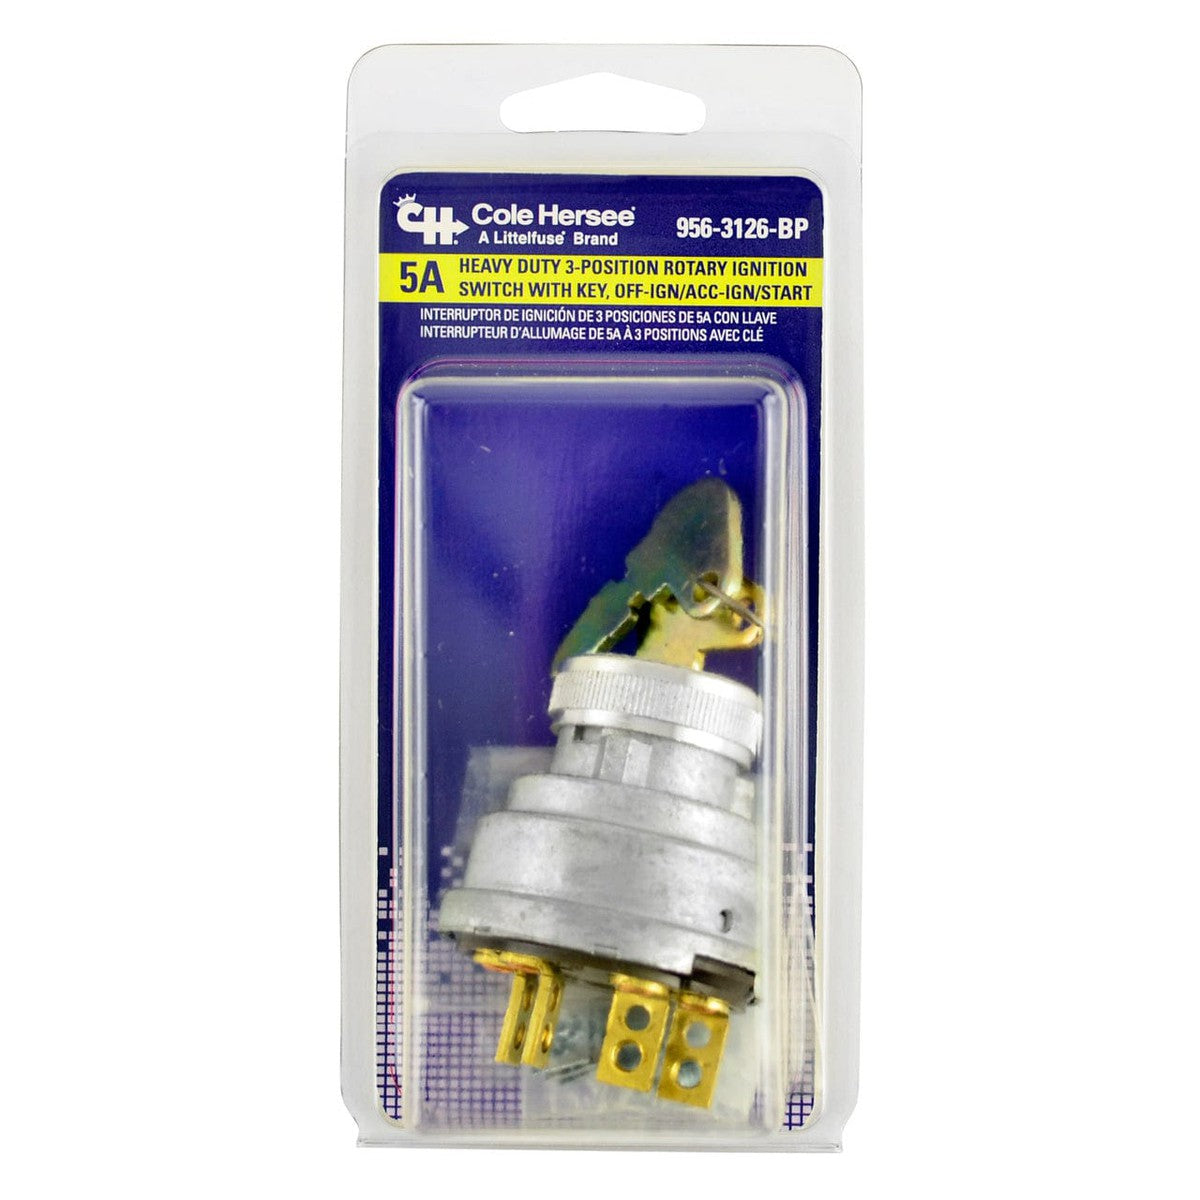 Cole Hersee Company Qualifies for Free Shipping Cole Hersee 3-Position Heavy-Duty Ignition Switch #956-3126-BP